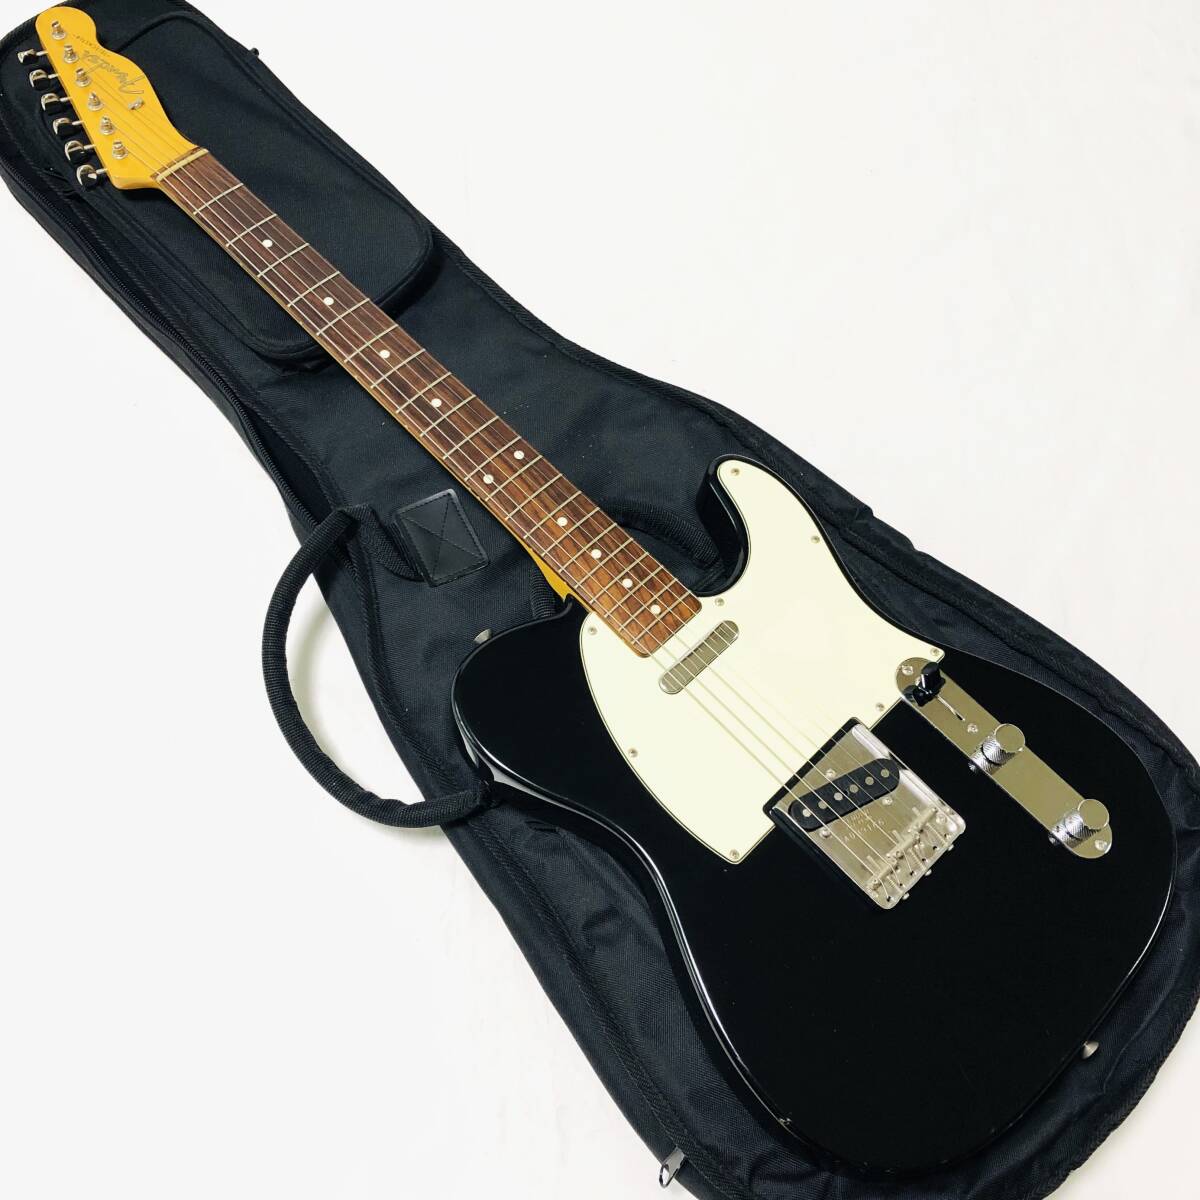 Fender Telecaster TL62-US BLK Crafted in Japan フェンダー テレキャスター 1962年モデル ブラックの画像1